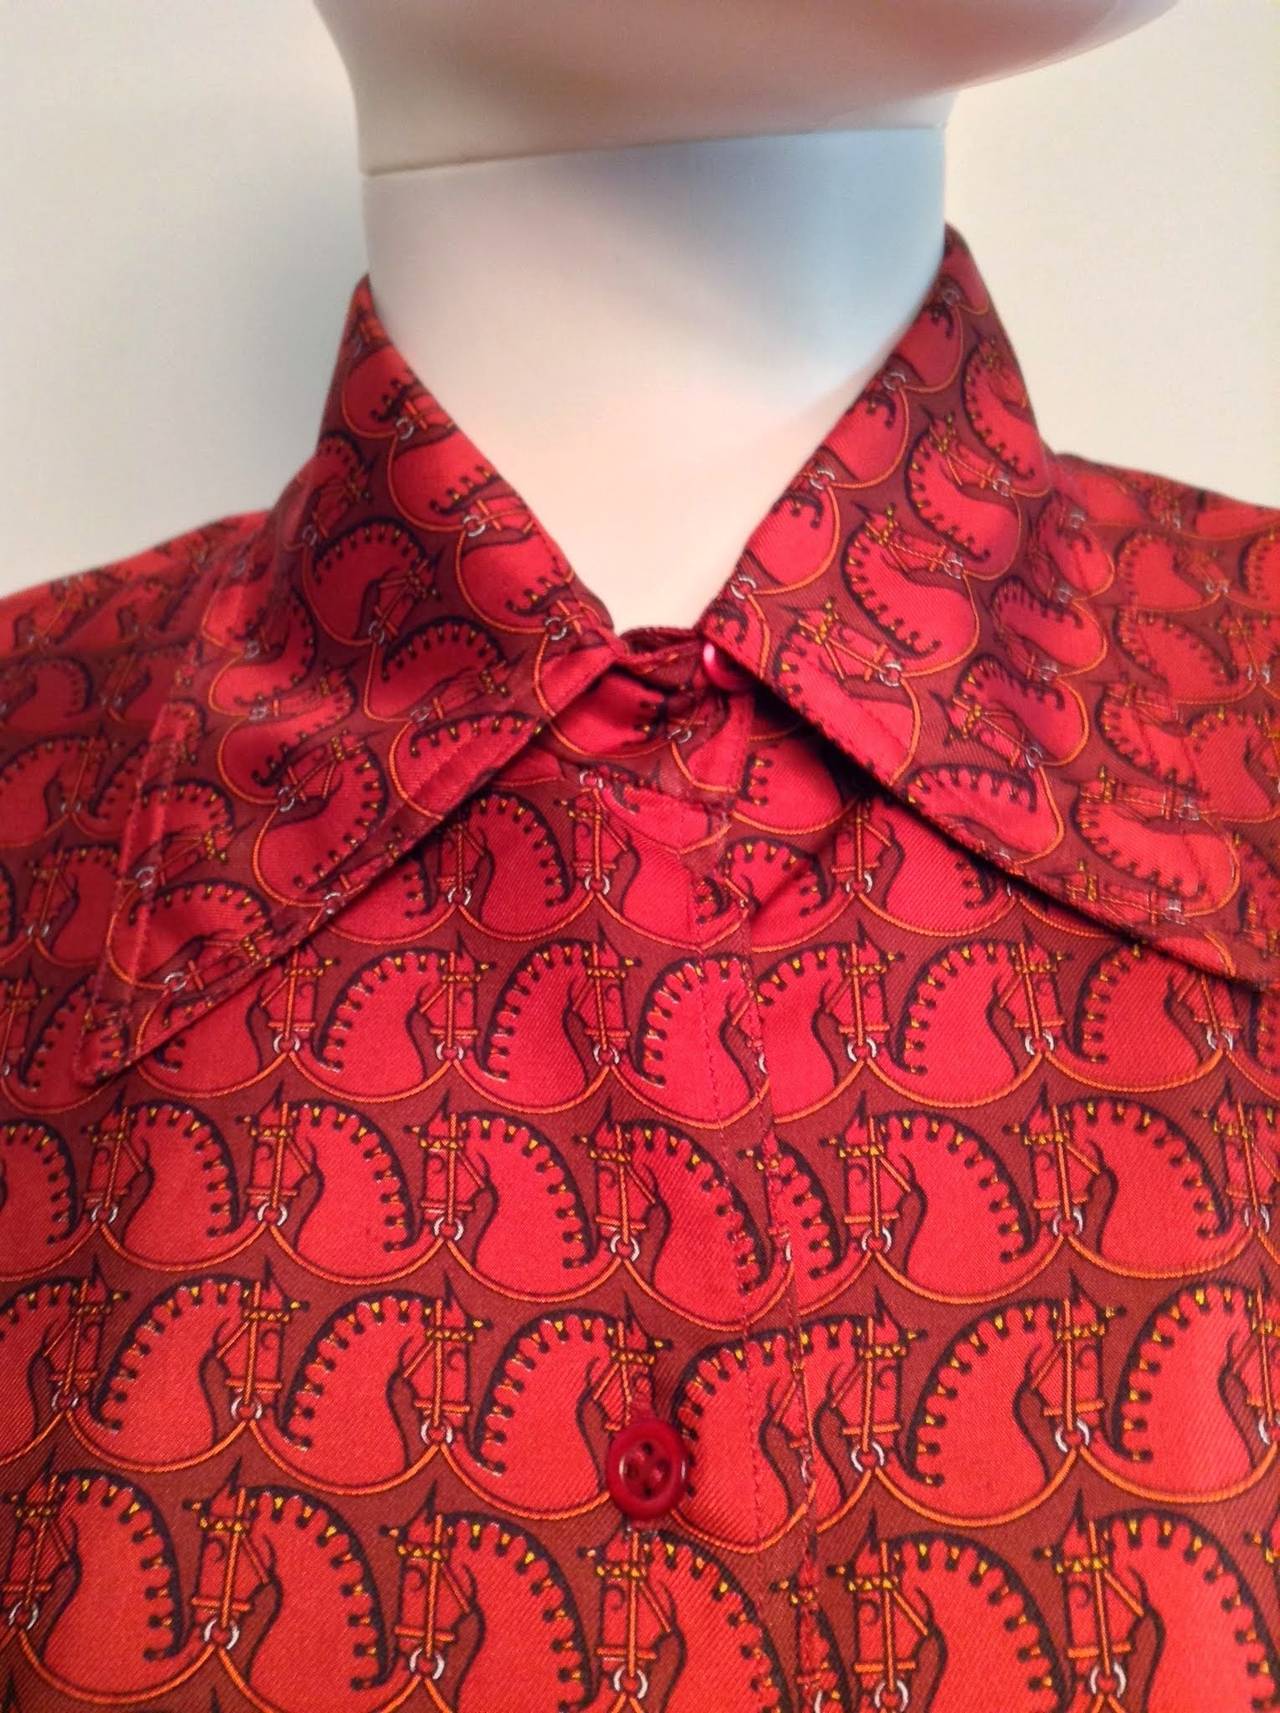 Hermes Vintage Silk Horse Head Blouse Size 44 In Good Condition For Sale In Toronto, Ontario